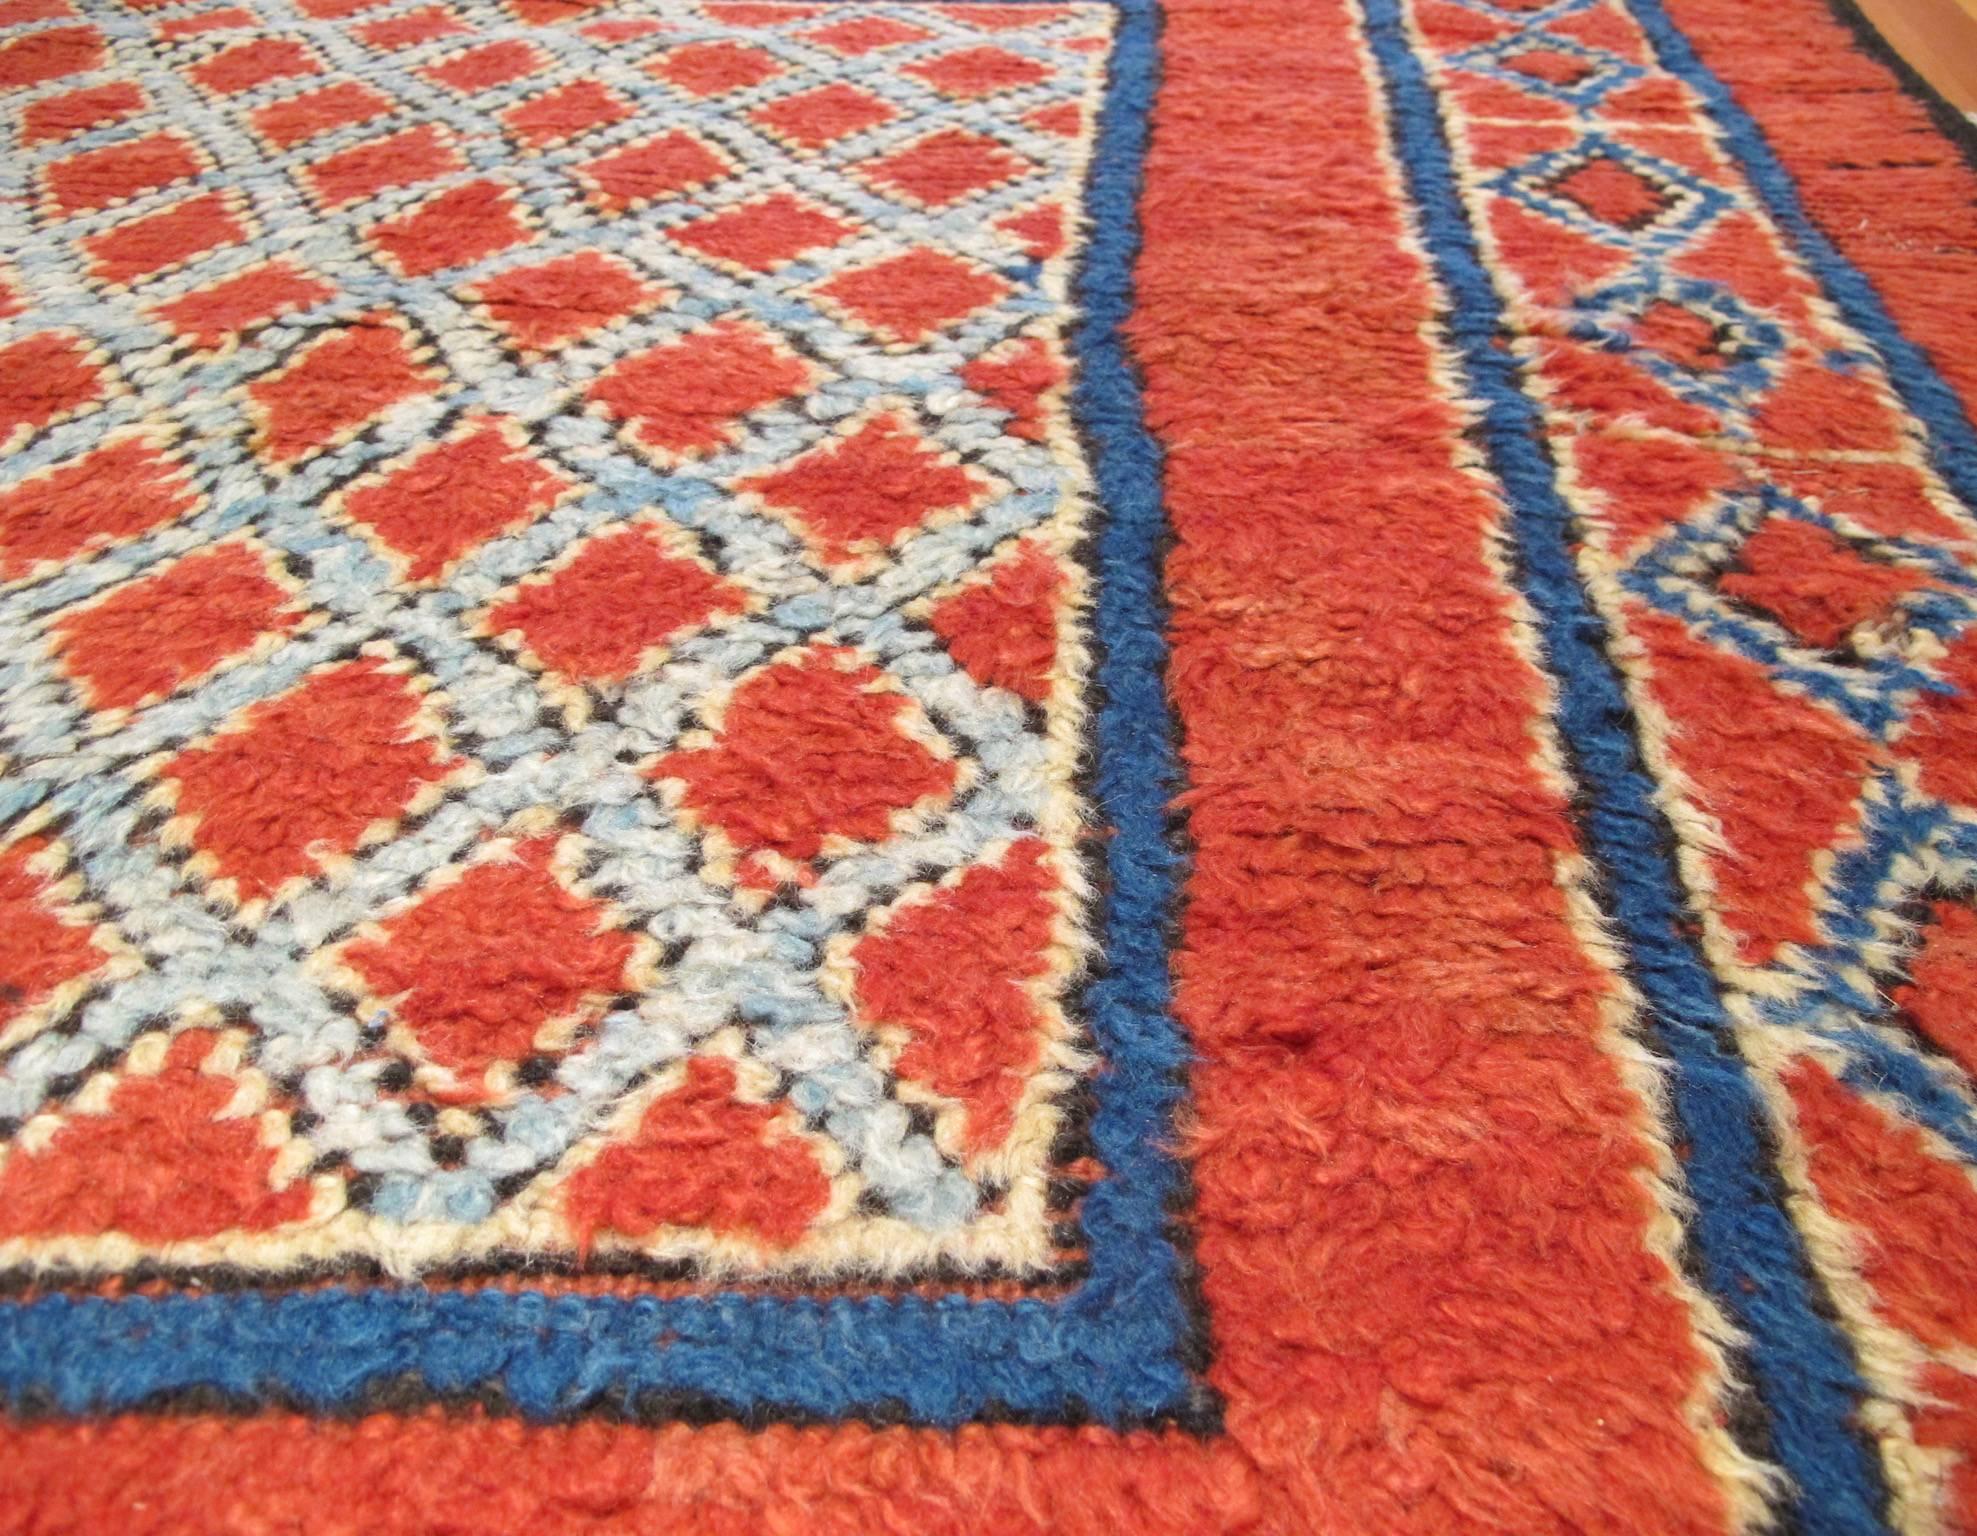 Late 19th Century Moroccan Corridor Carpet with Madder Red Ground 2